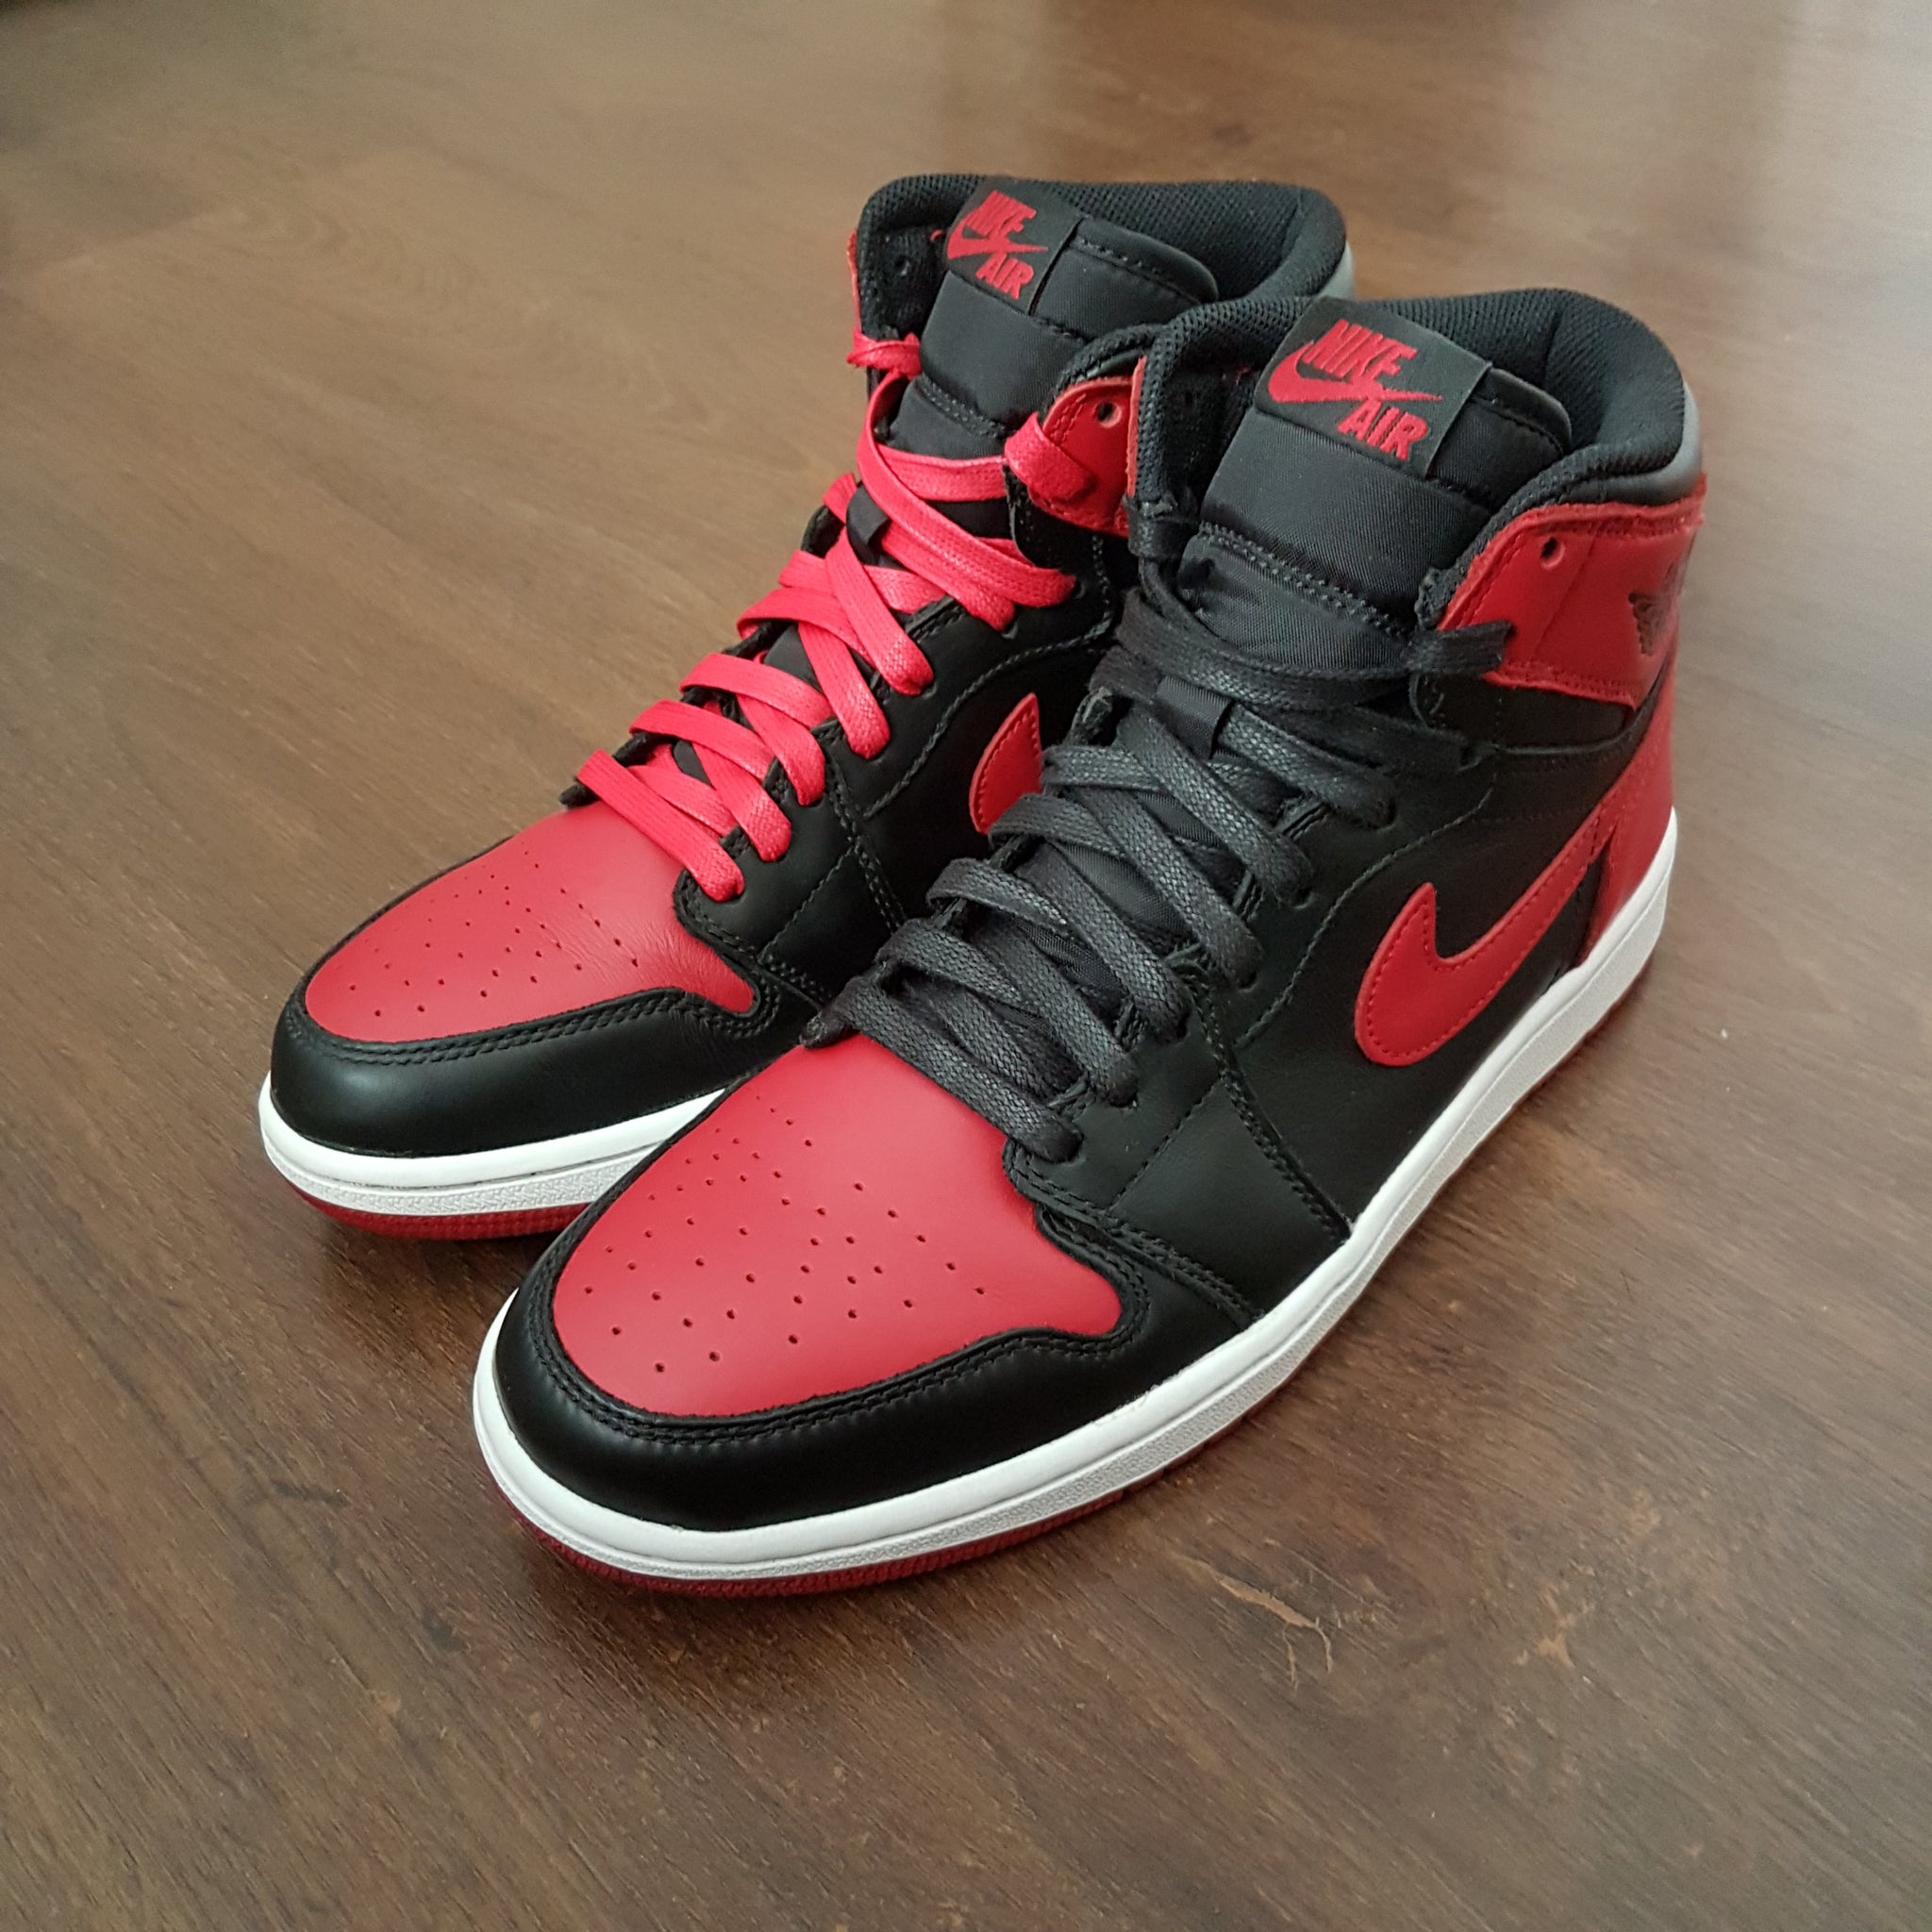 red laces for jordan 1